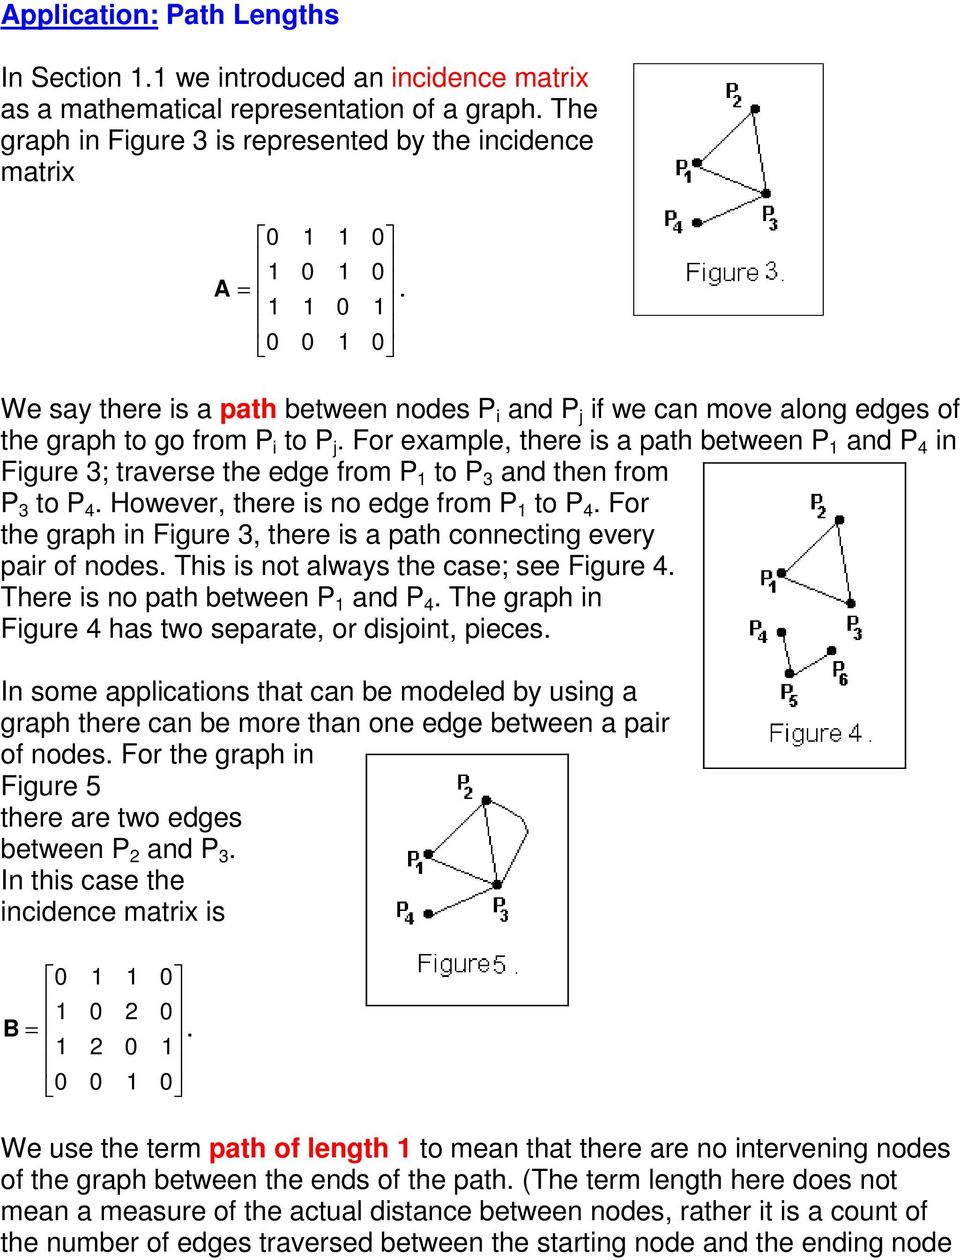 We say there is a path between nodes P i and P j if we can move along edges of the graph to go from P i to P j.